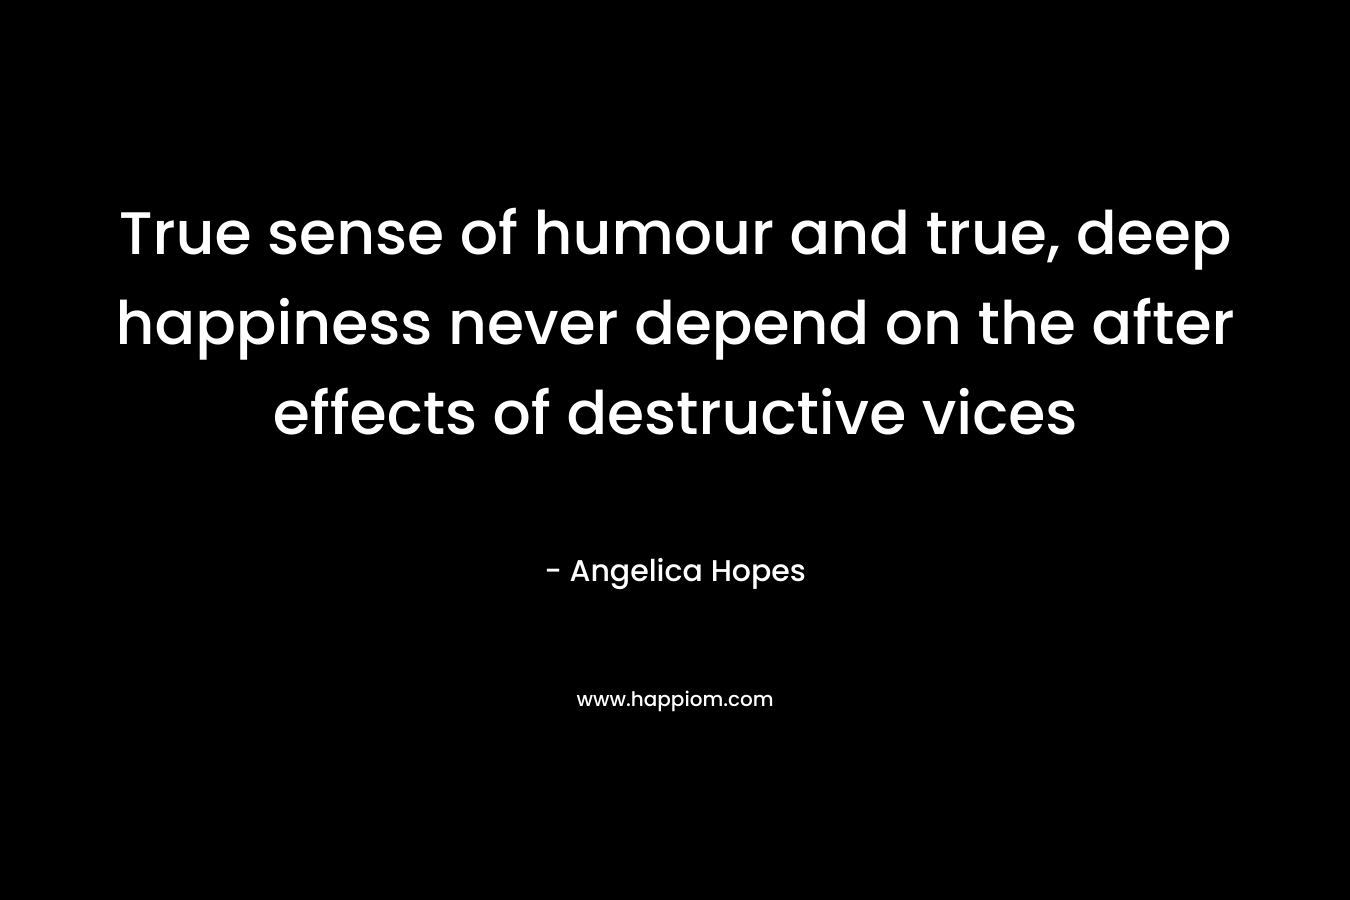 True sense of humour and true, deep happiness never depend on the after effects of destructive vices – Angelica Hopes